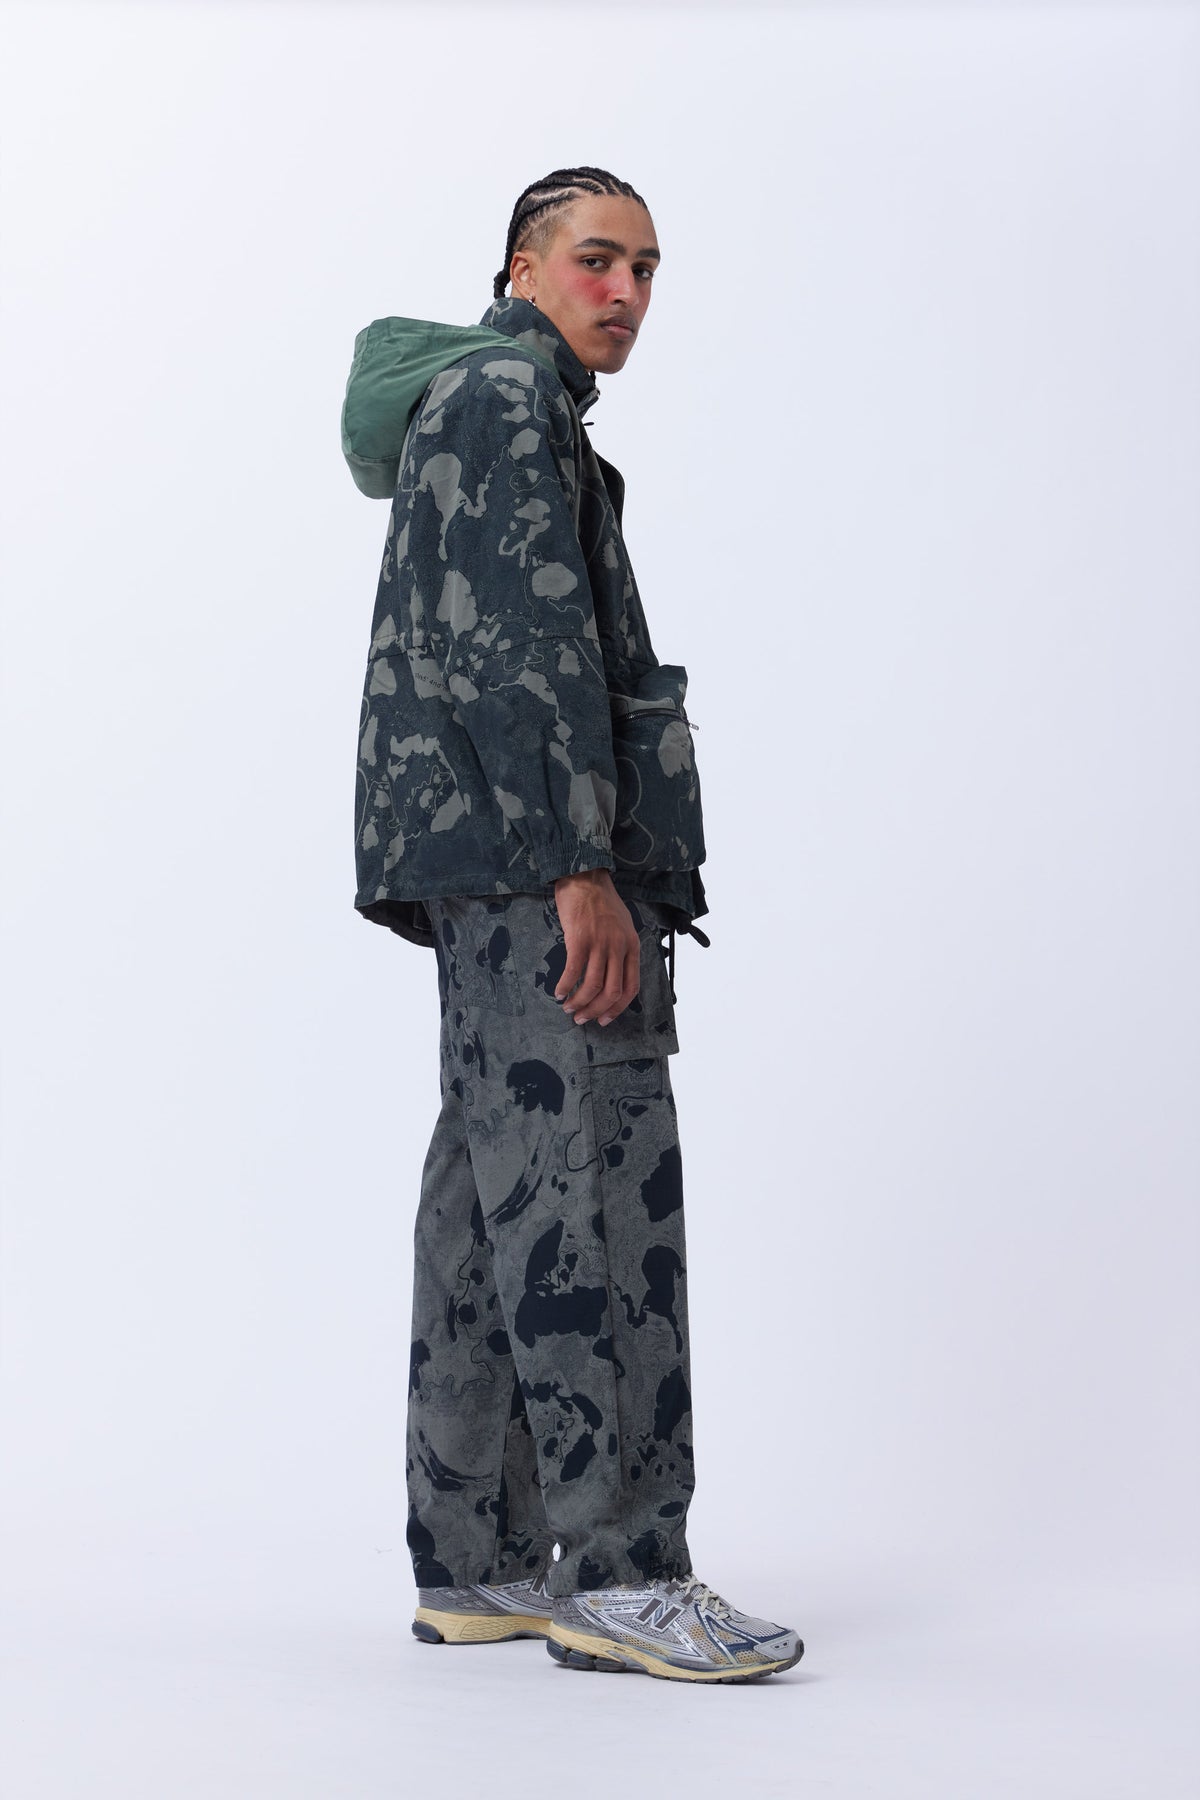 P.A.M. Geo Mapping Printed Pants - Pond